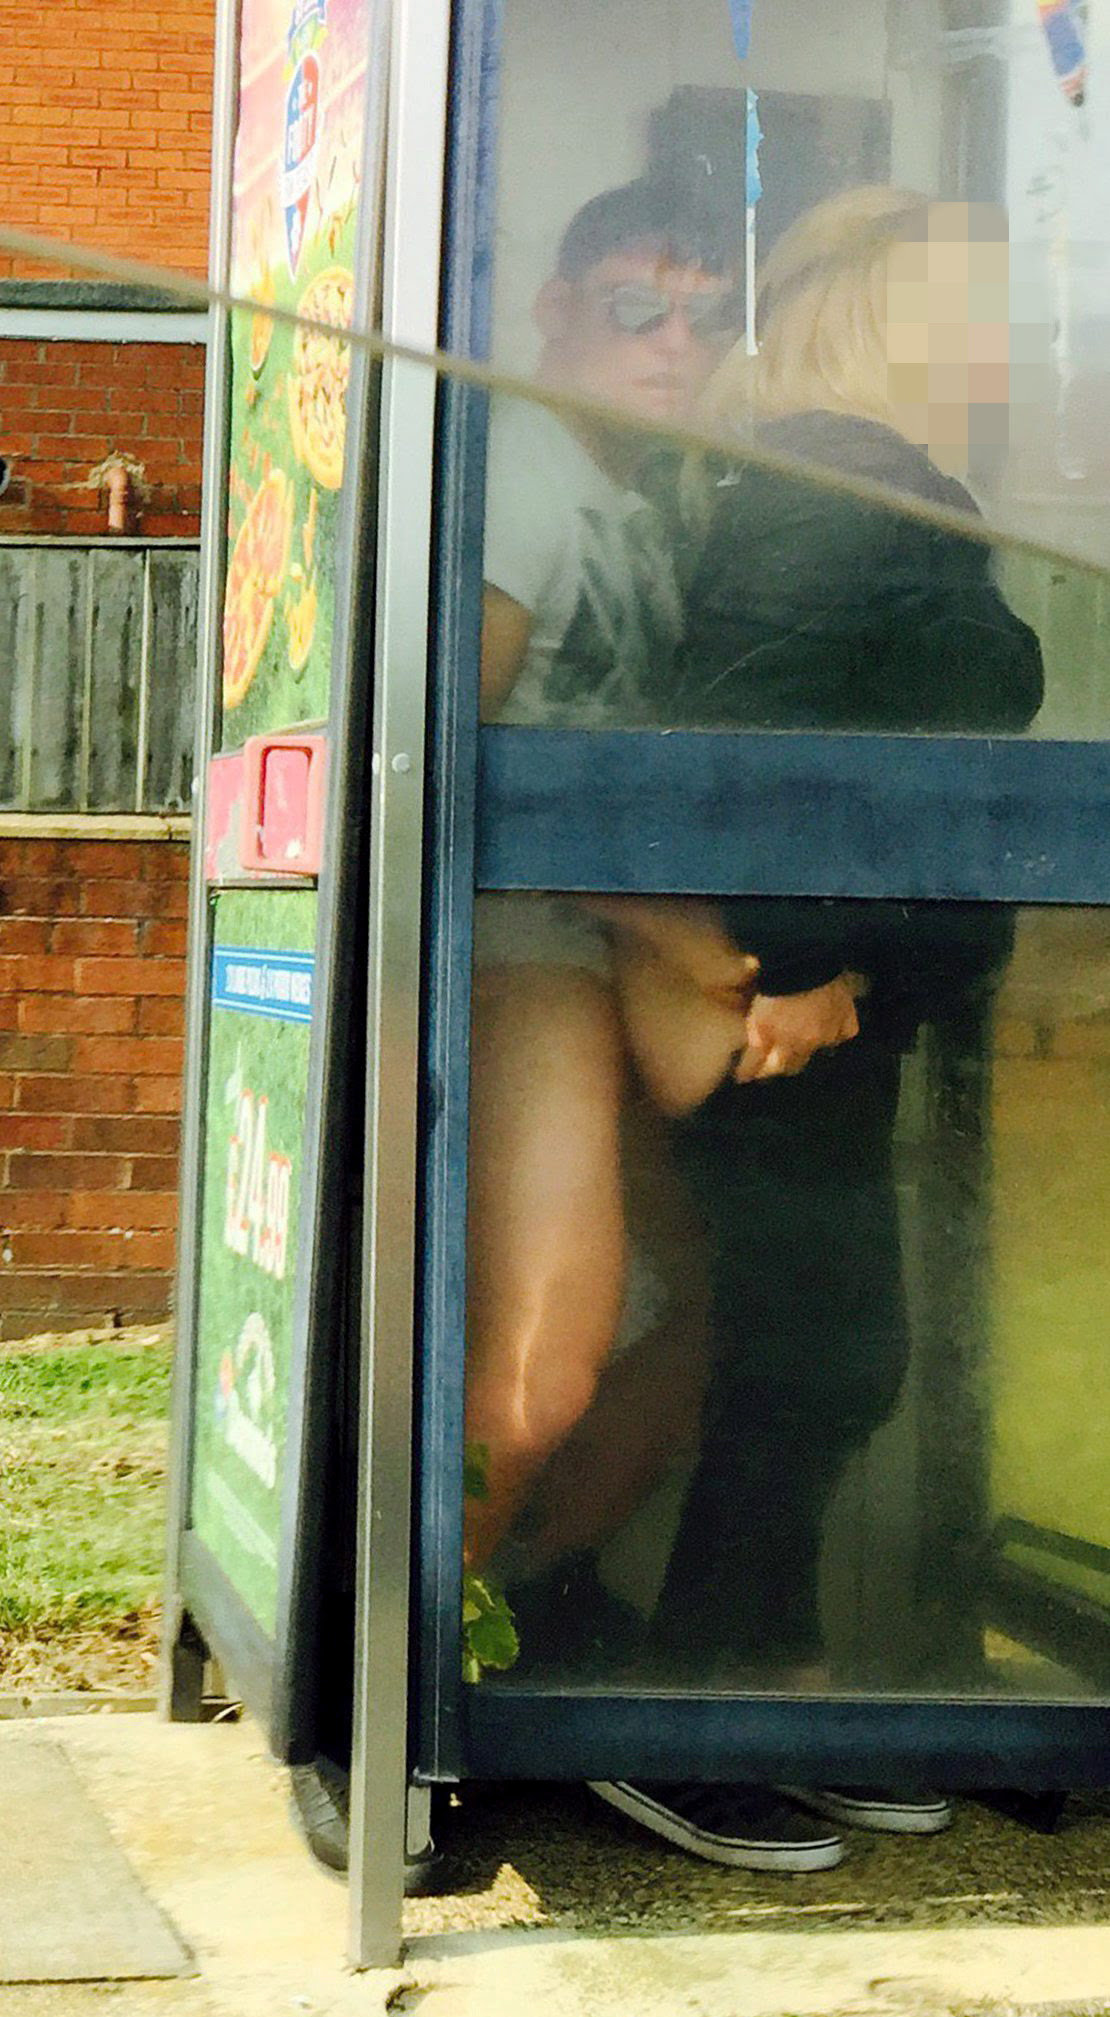 Couple Caught Having Sex In Phone Booth (NSFW Photo) HuffPost Weird News